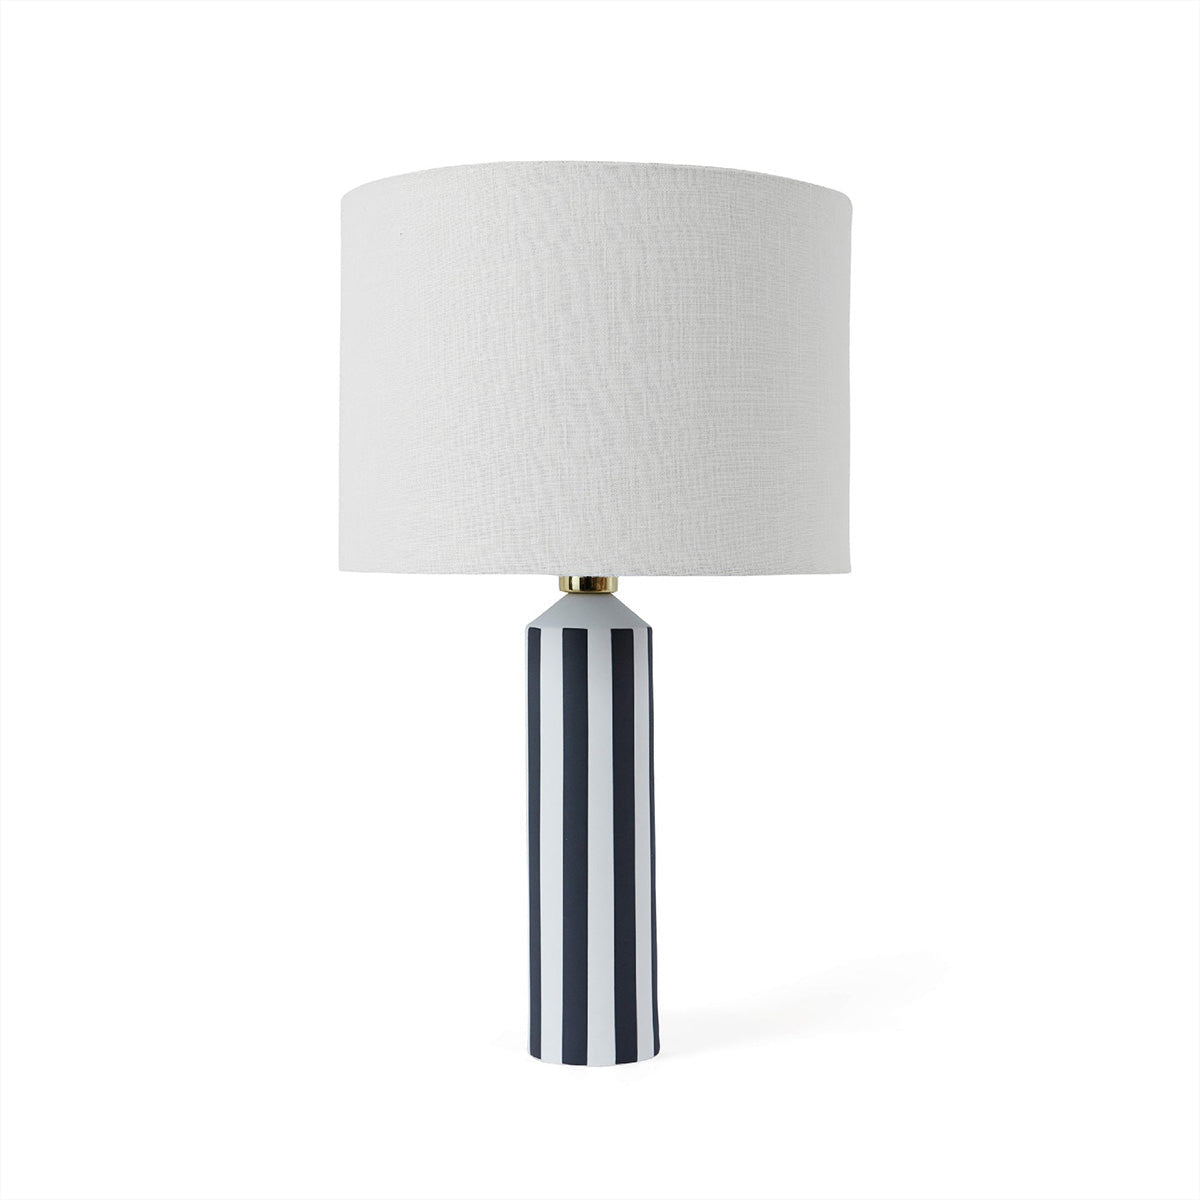 Toppu Lamp - Offwhite / Anthracite Table Lamp OYOY 